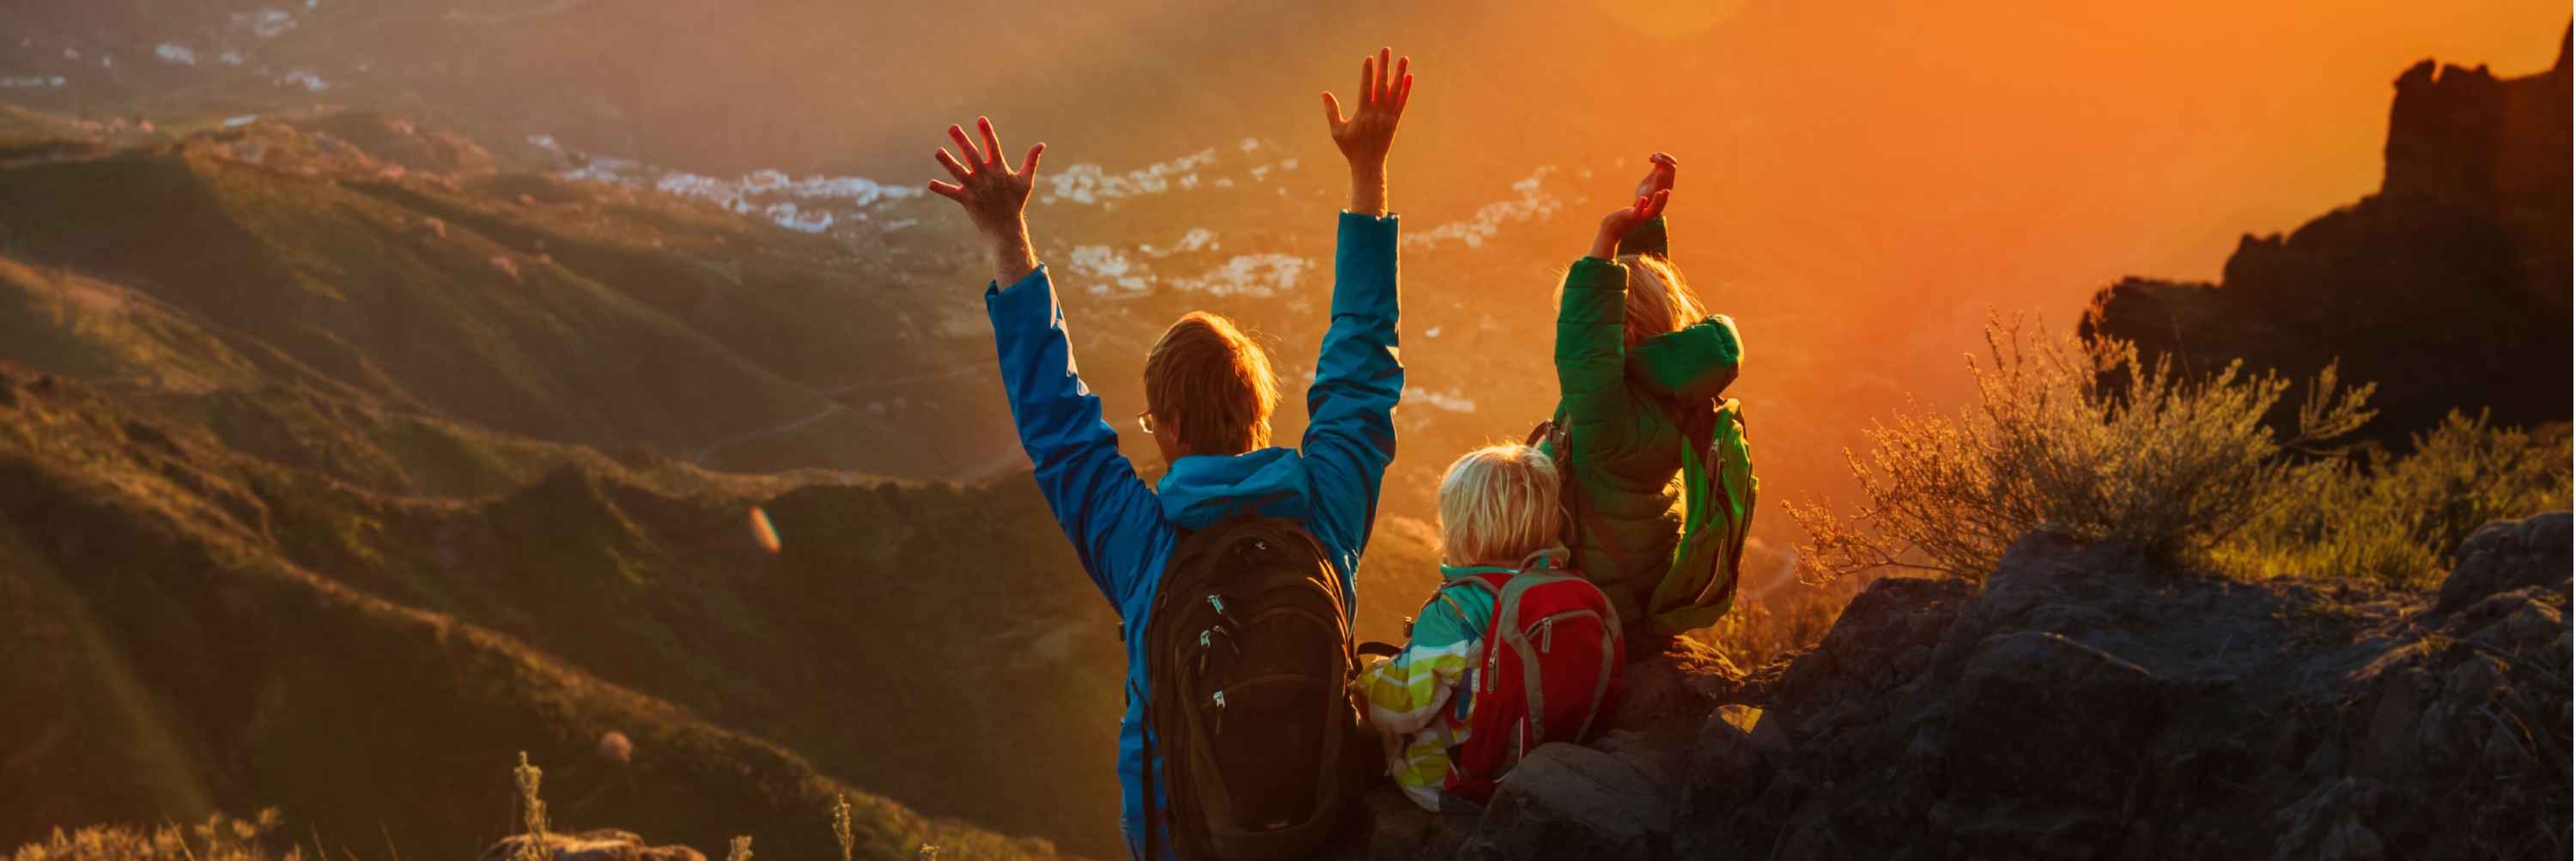 Family at the top of a mountain with arms raised at sunset